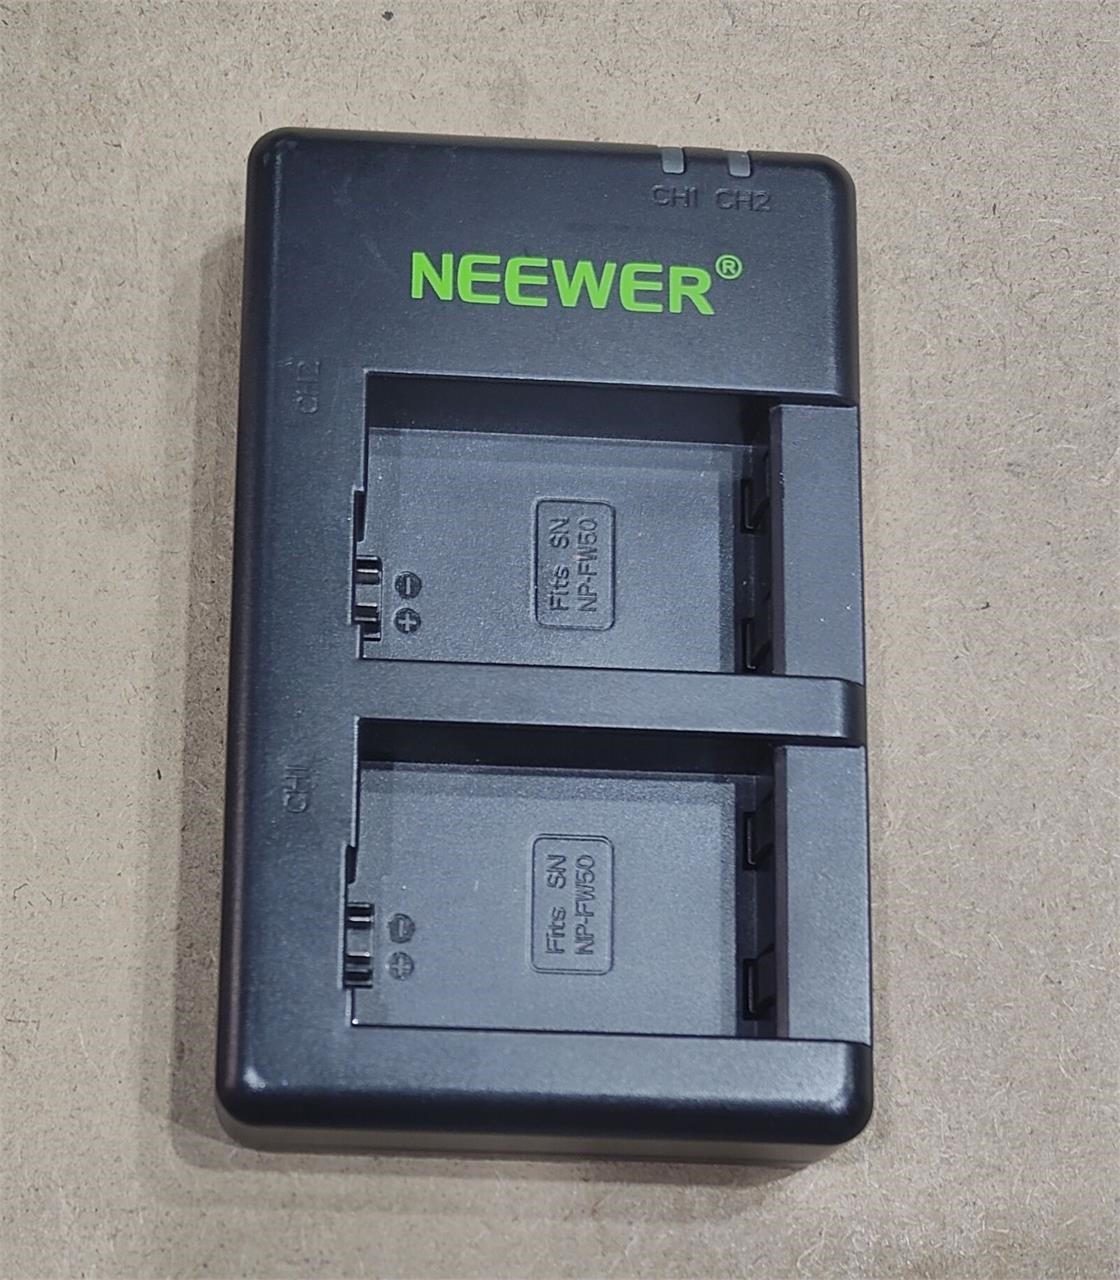 ($39) Neewer NP-FW50 Camera Battery Charger